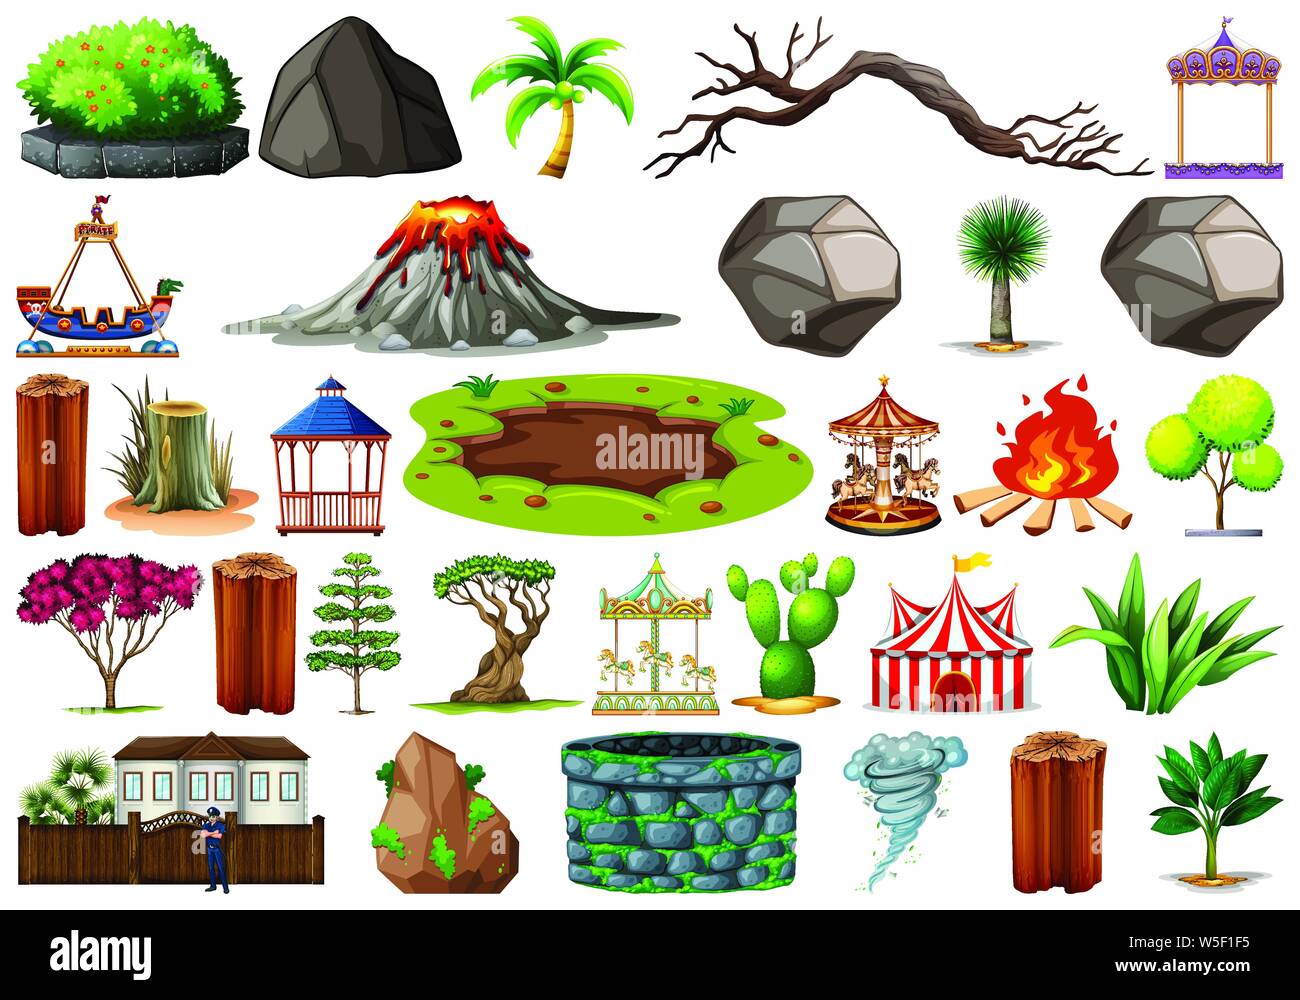 Collection of outdoor nature themed objects and plant elements illustration Stock Vector